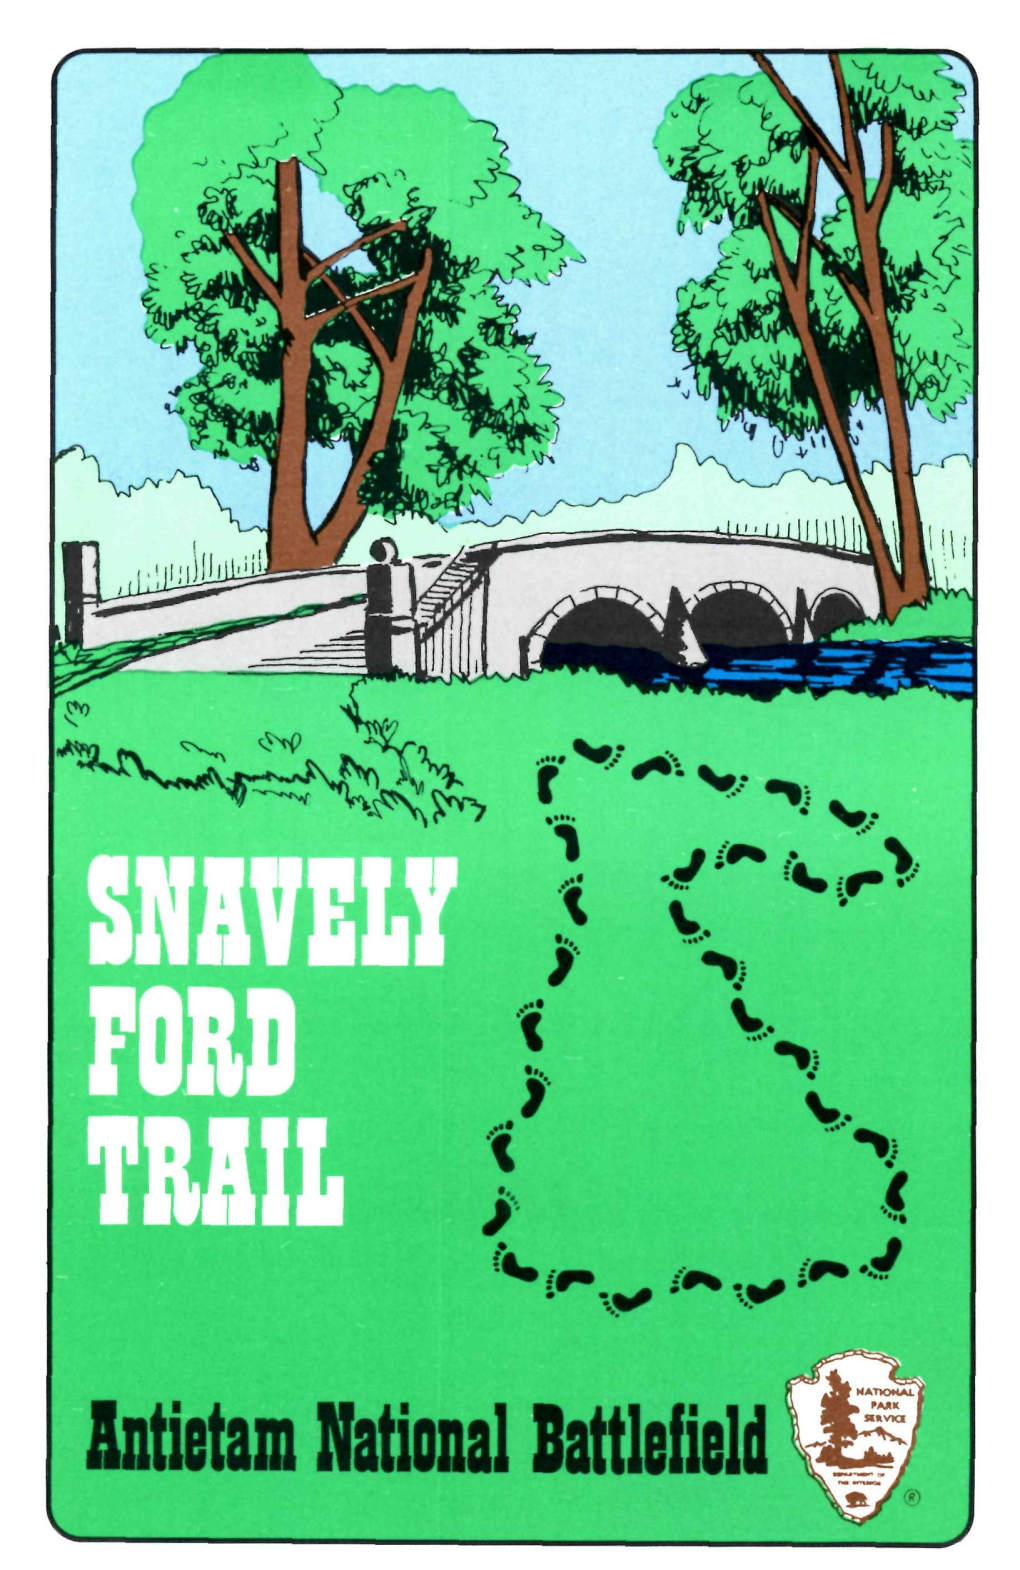 Snavely Ford Trail